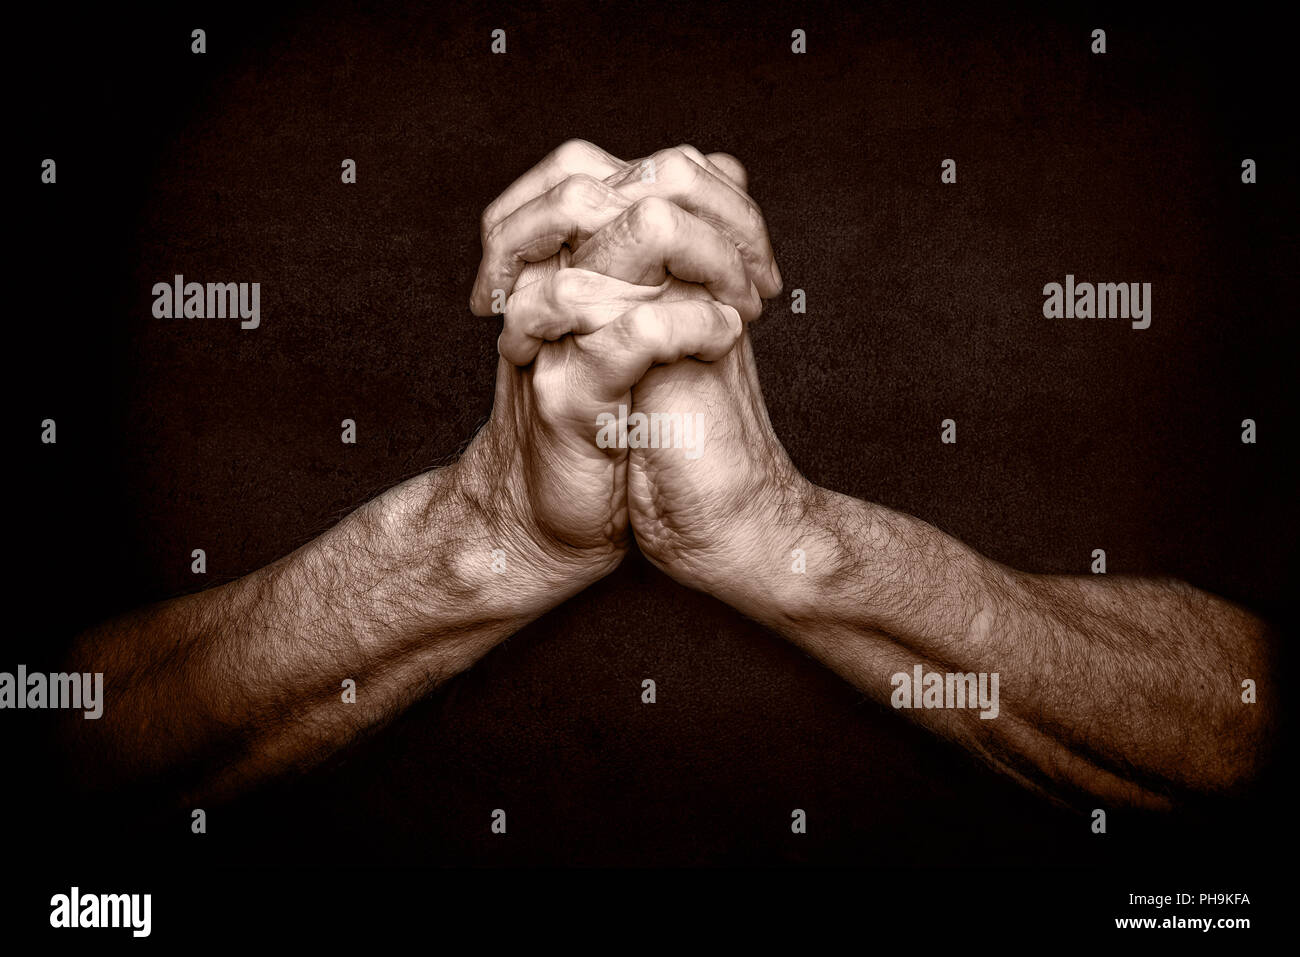 Man's Hands with crossed fingers. This is a classical gesture of a person praying God in the christian religions. Stock Photo